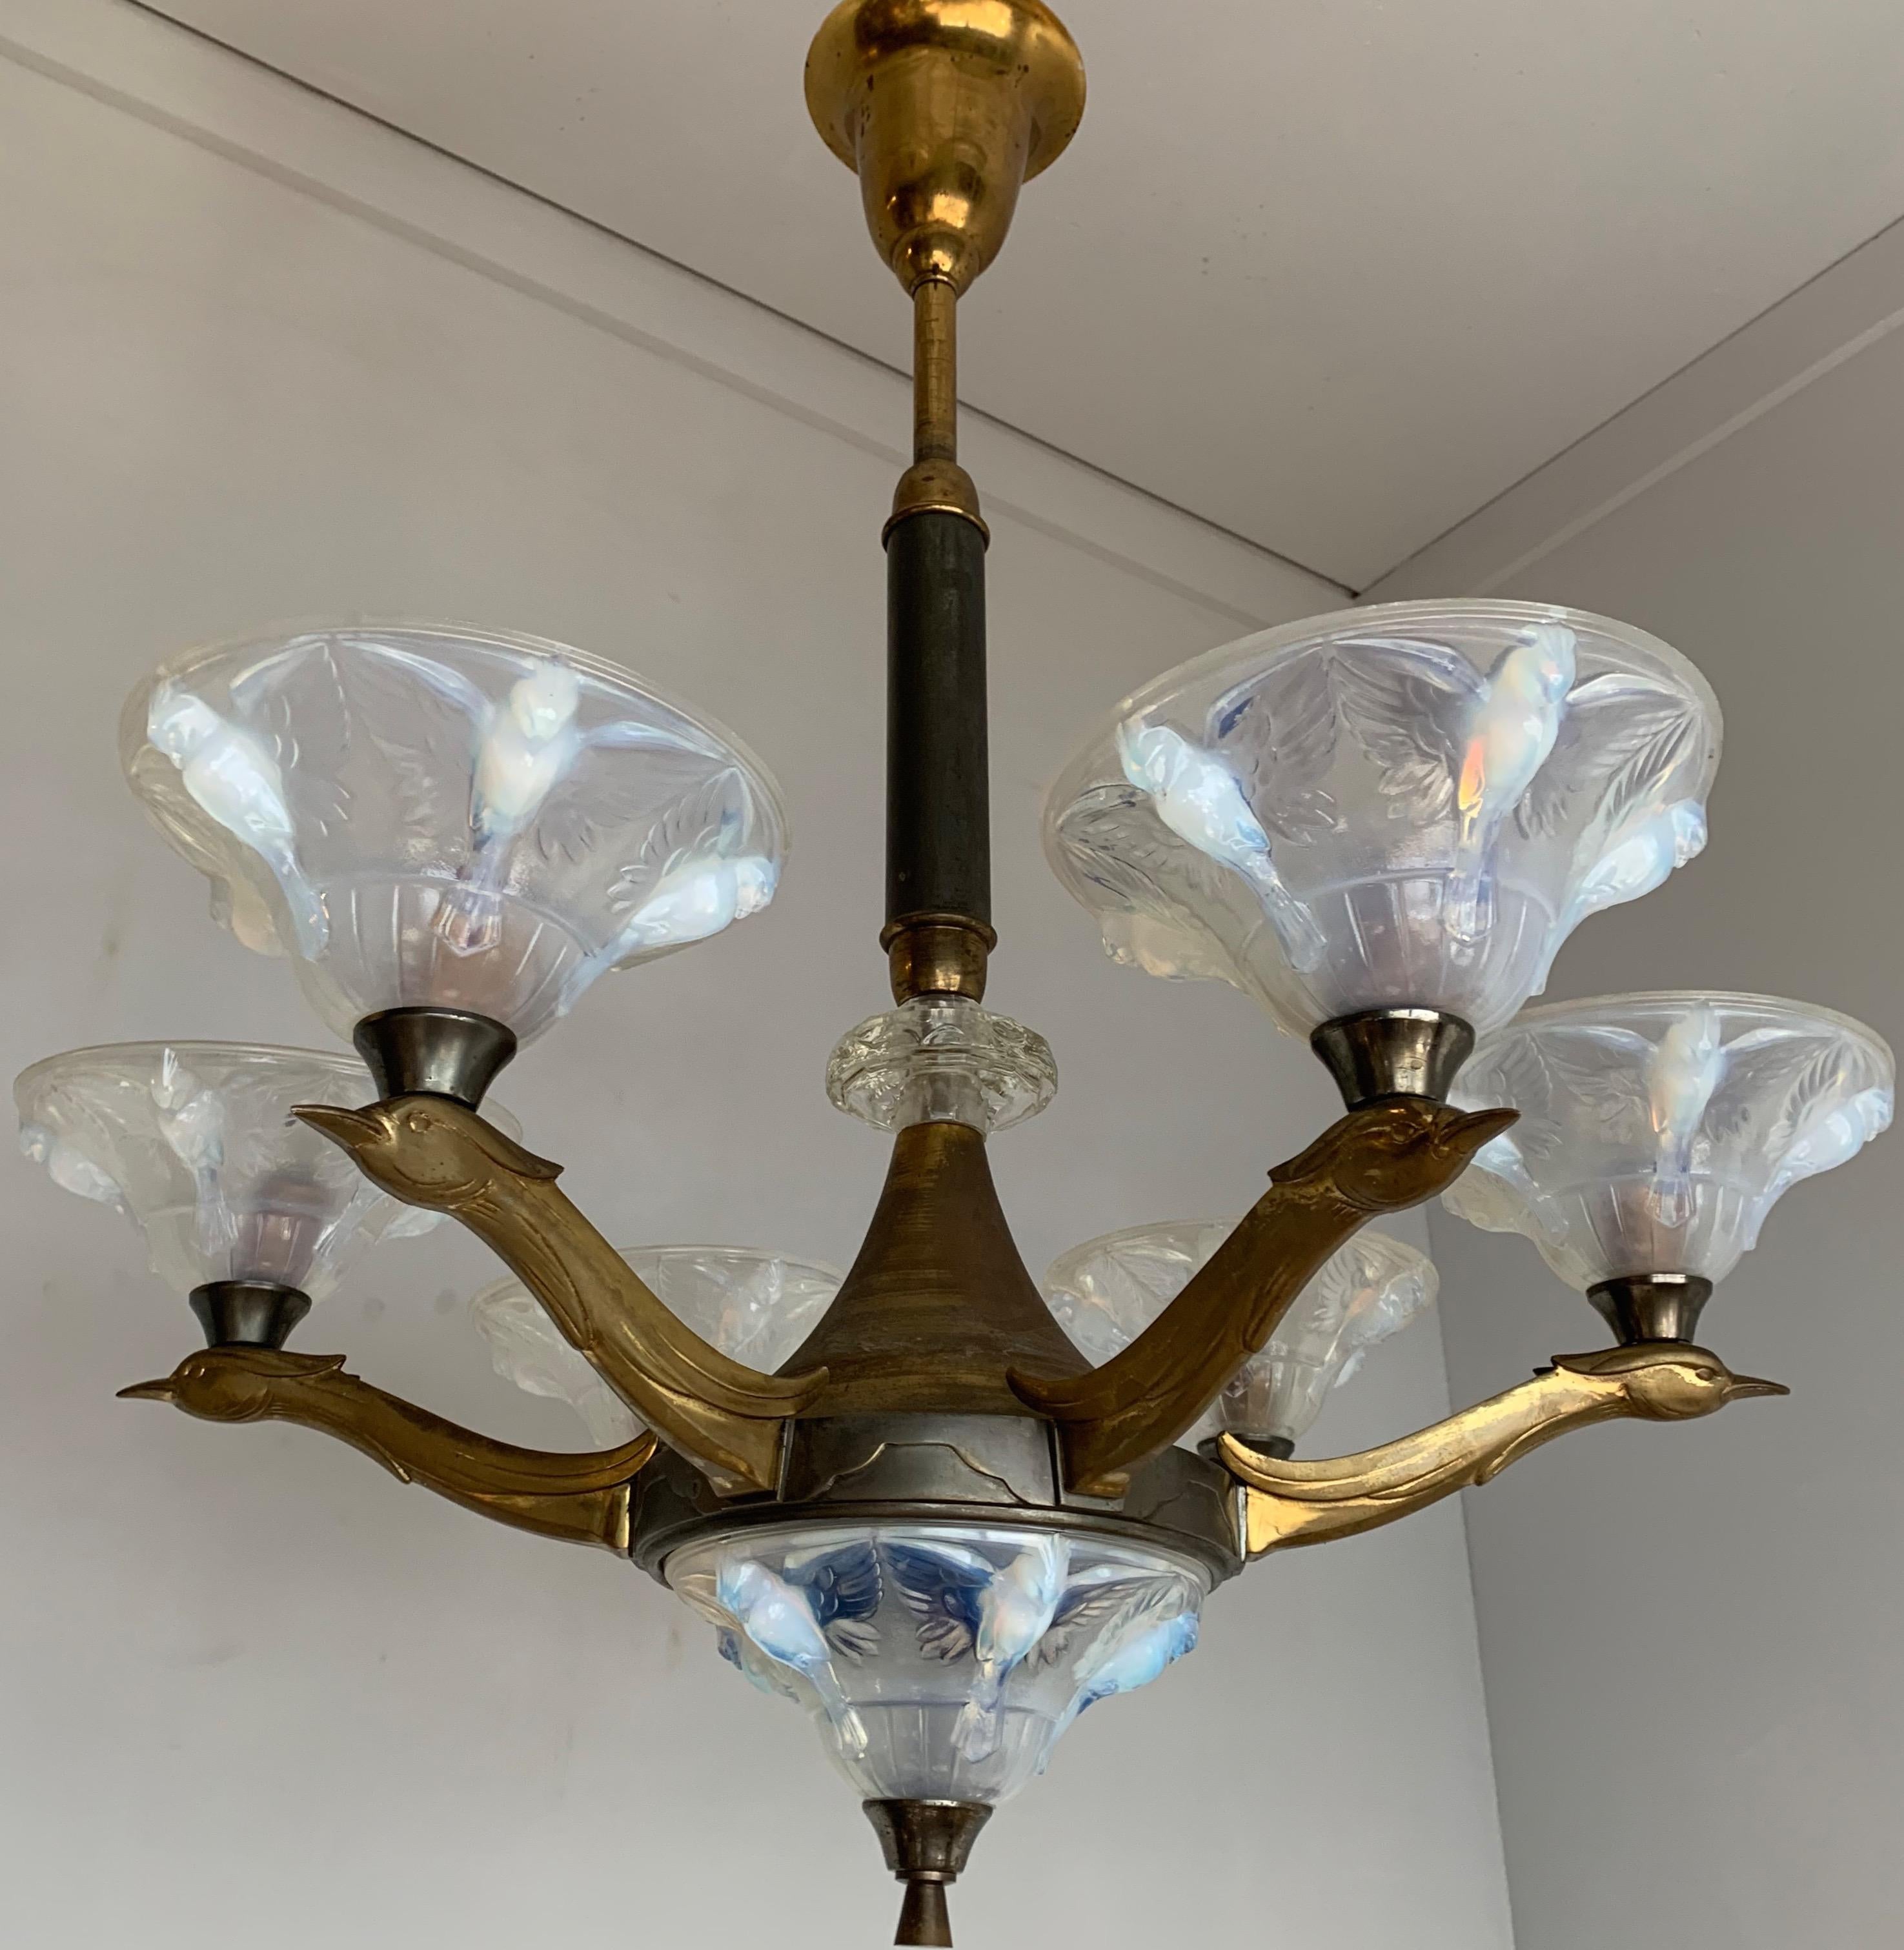 Very stylish and rare, 1920s Art Deco pendant light with a beautiful patina.

When we first saw this rare, sizeable and highly decorative Art Deco pendant we immediately knew it had to become ours. The wonderful design and the beautiful materials